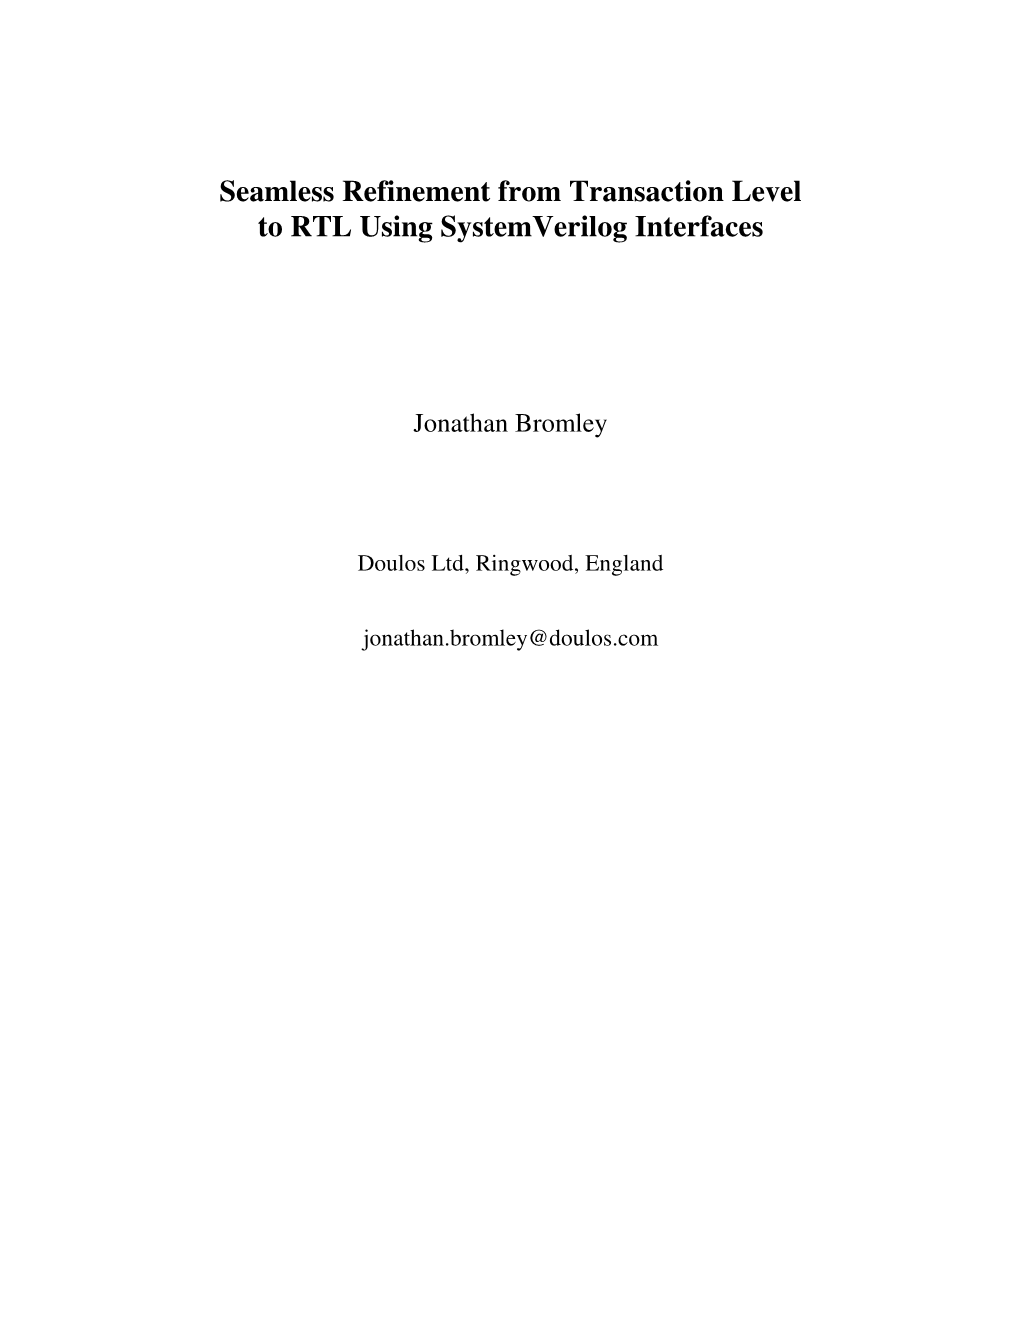 Seamless Refinement from Transaction Level to RTL Using Systemverilog Interfaces